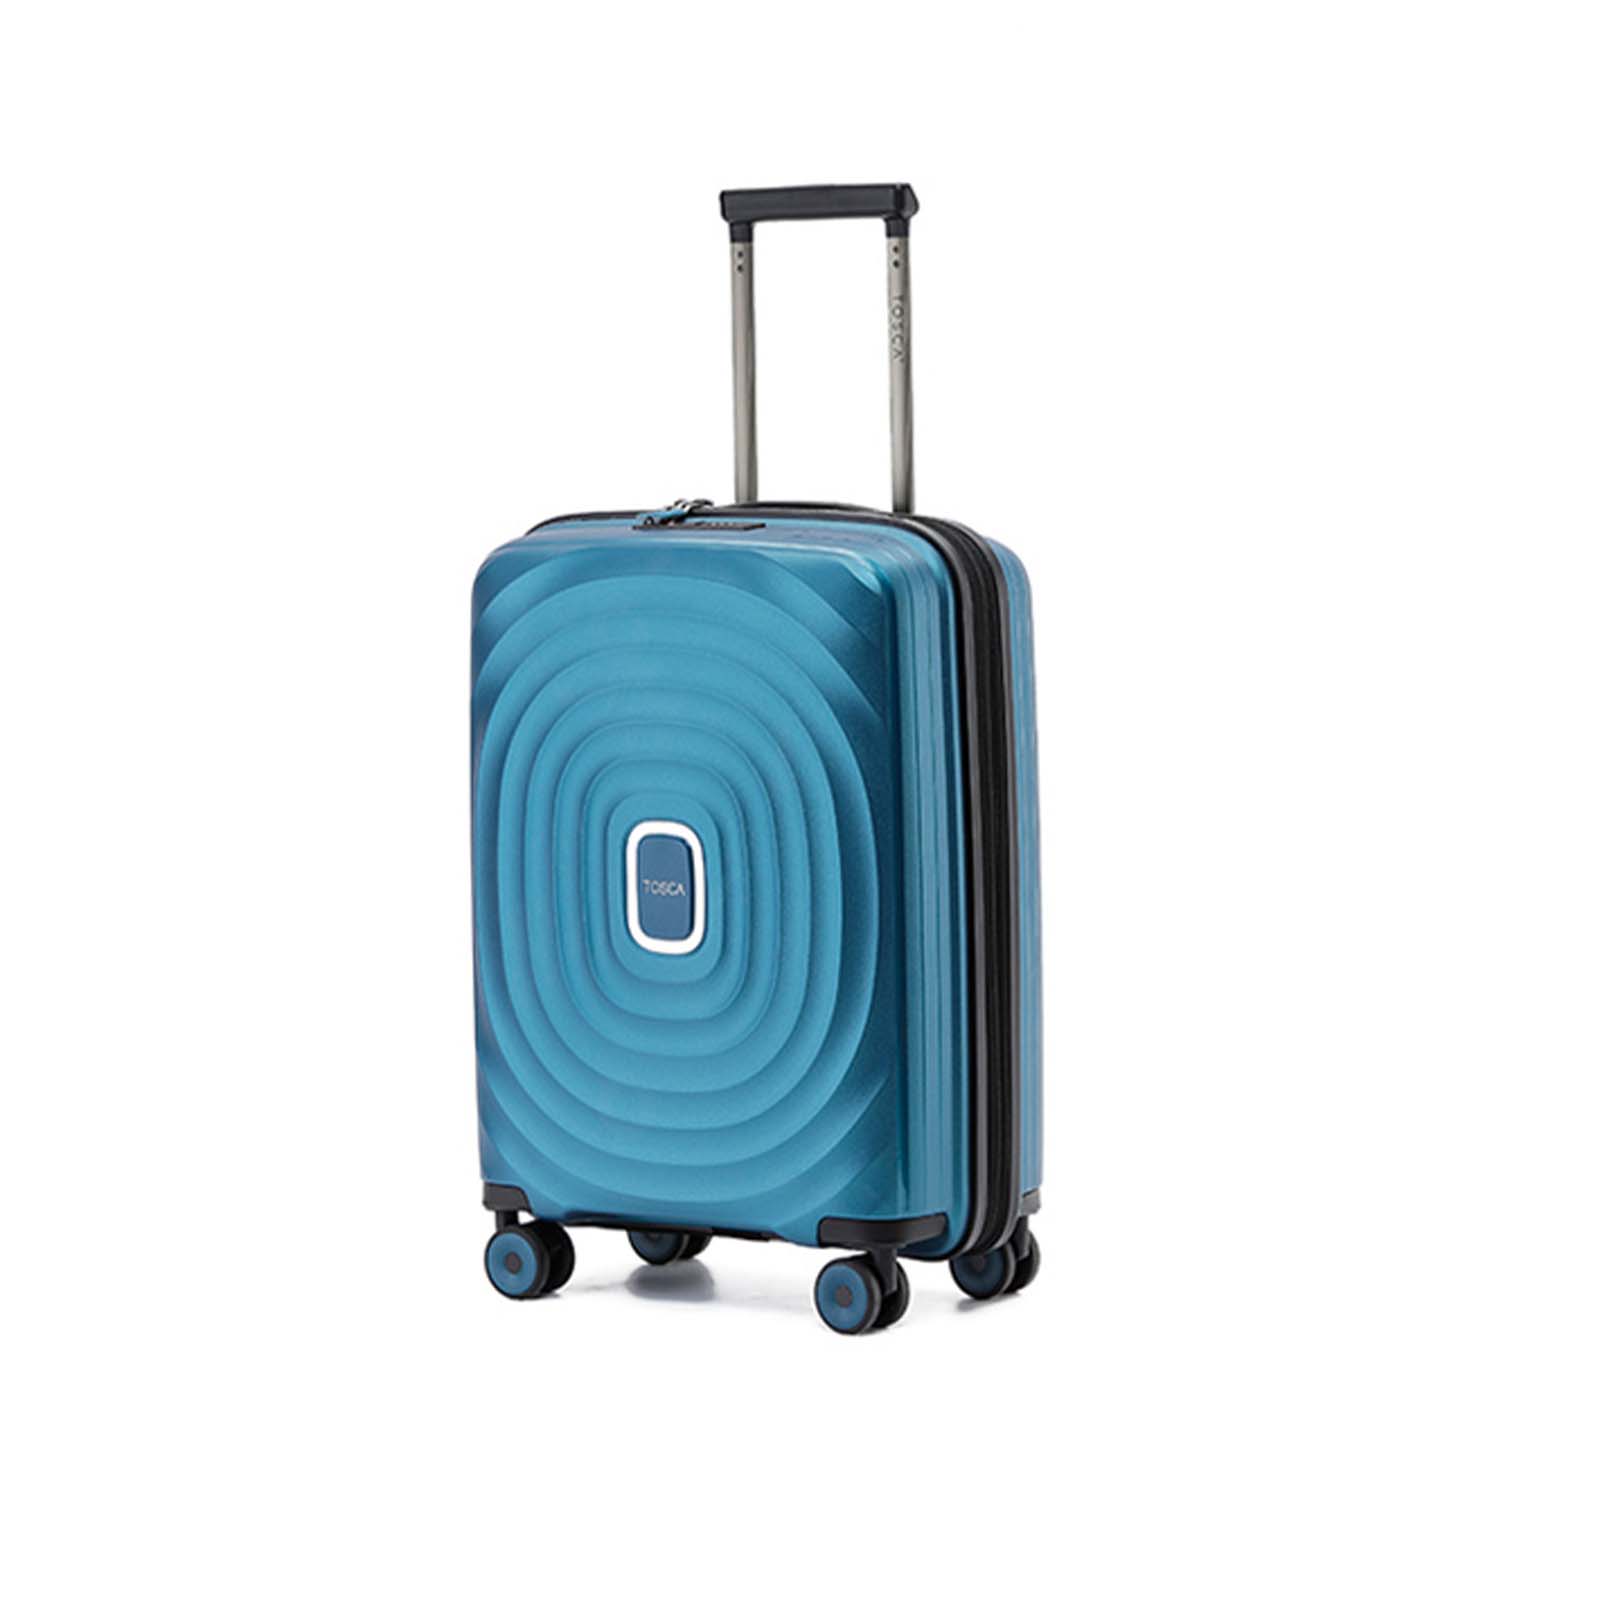 tosca-eclipse-4-wheel-55cm-carry-on-suitcase-blue-front-angle